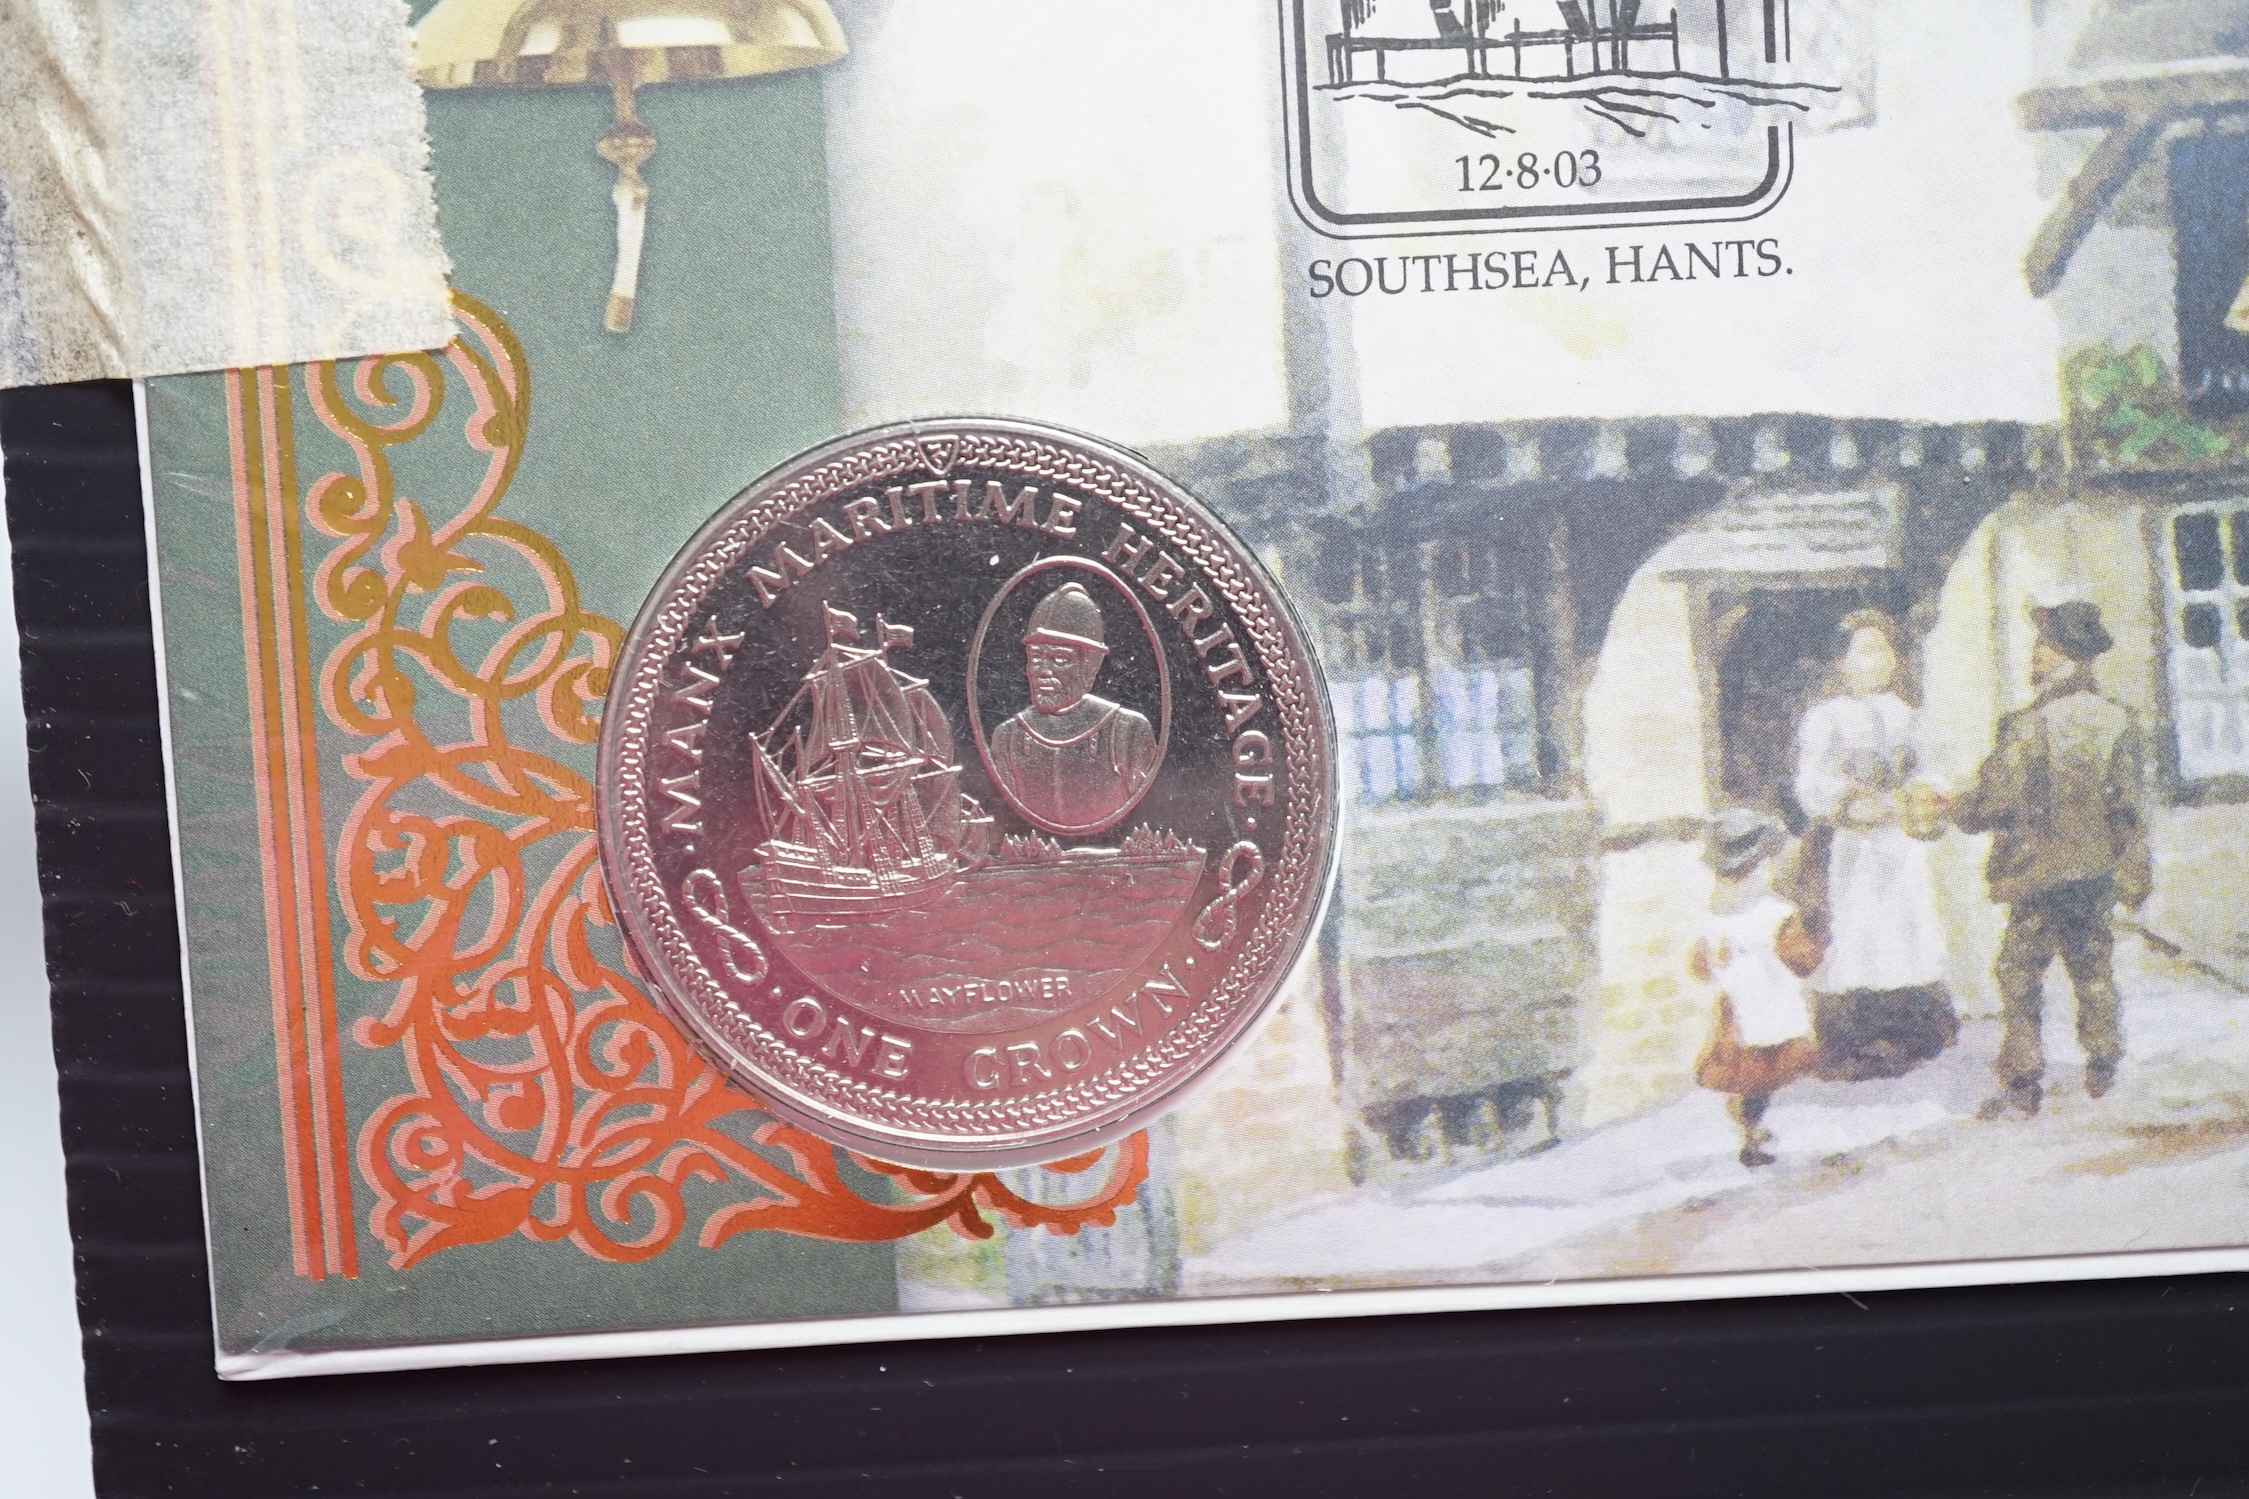 A quantity of assorted modern first day cover commemorative coins to include 2002 United Kingdom Brilliant Uncirculated Coin Collection and 2001 Victorian Anniversary crown